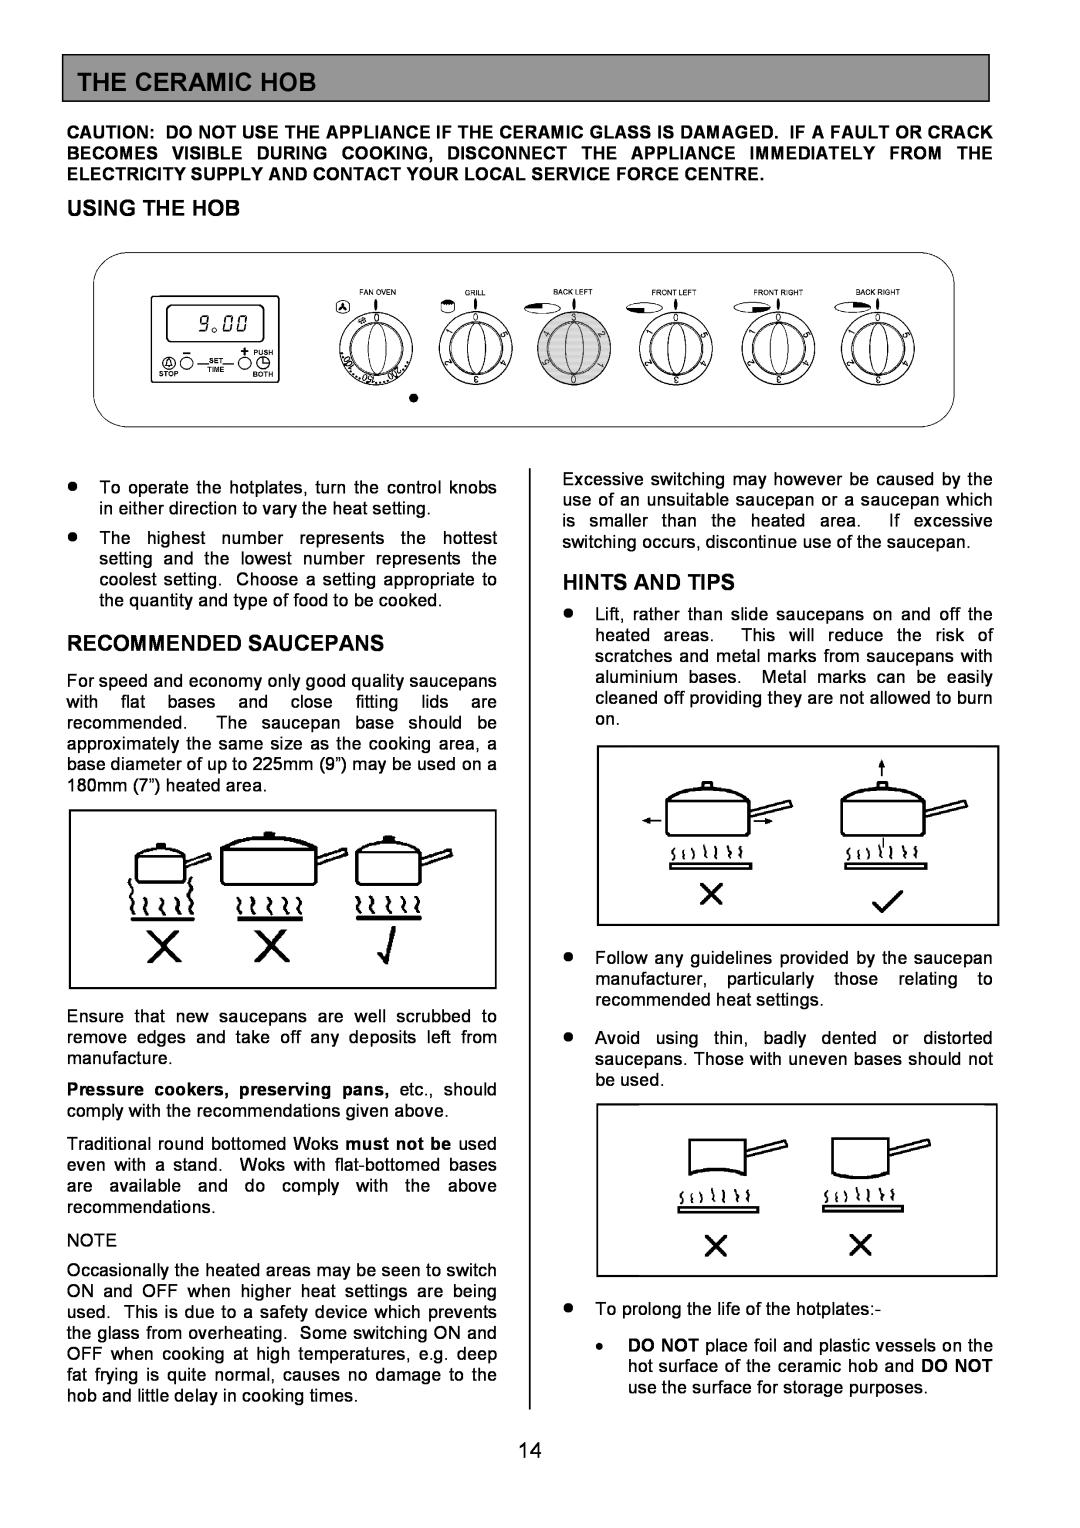 Tricity Bendix SIE326 installation instructions The Ceramic Hob, Using The Hob, Recommended Saucepans, Hints And Tips 